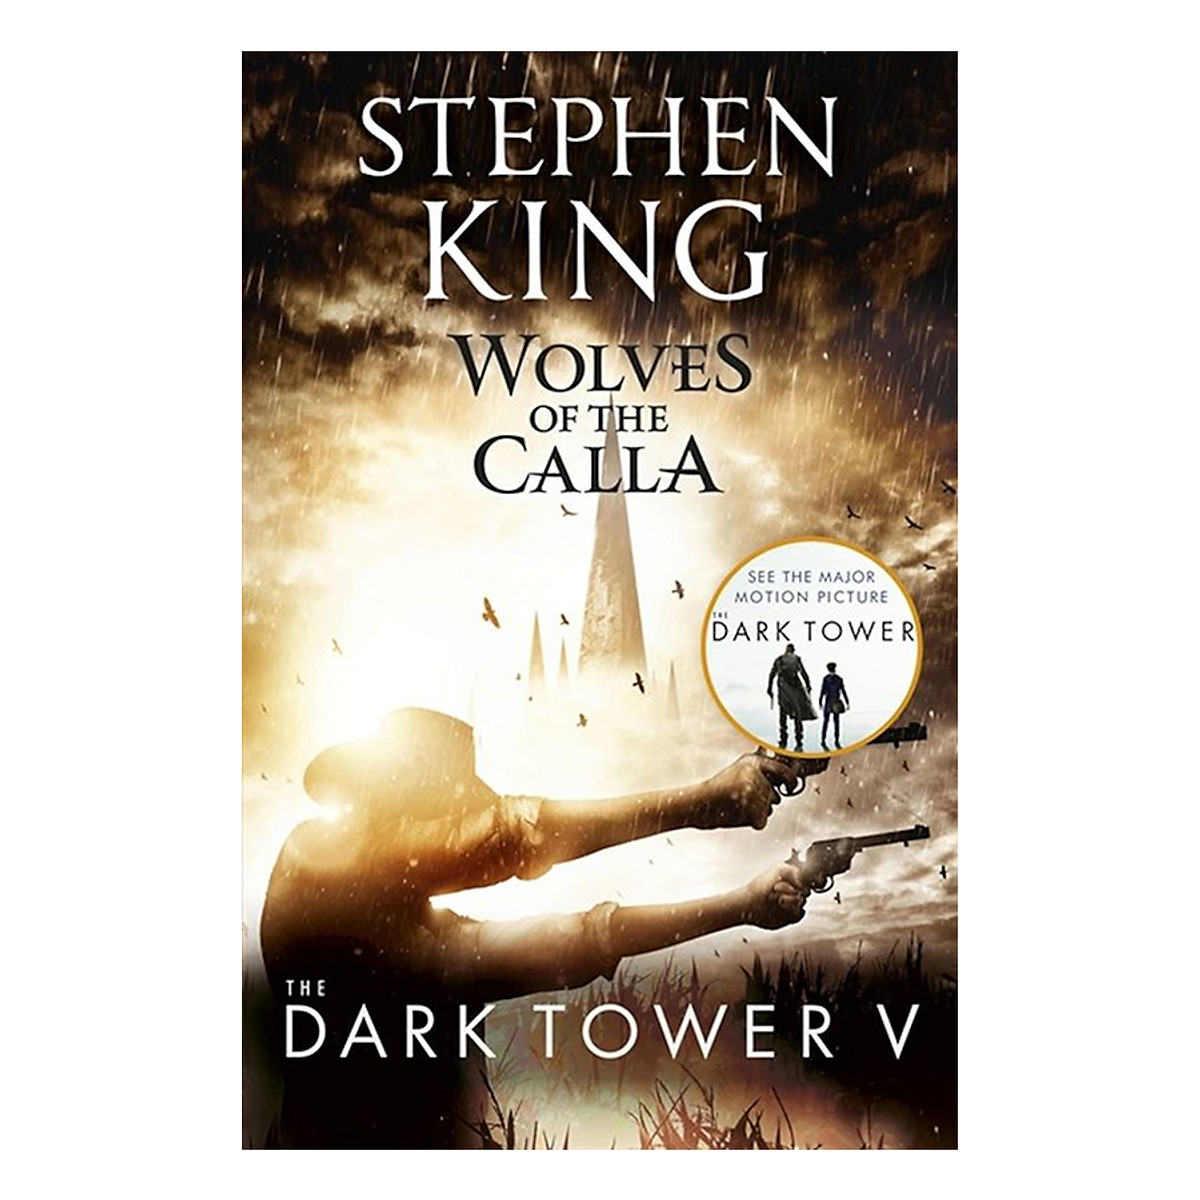 Stephen King: The Dark Tower V: Wolves of the Calla